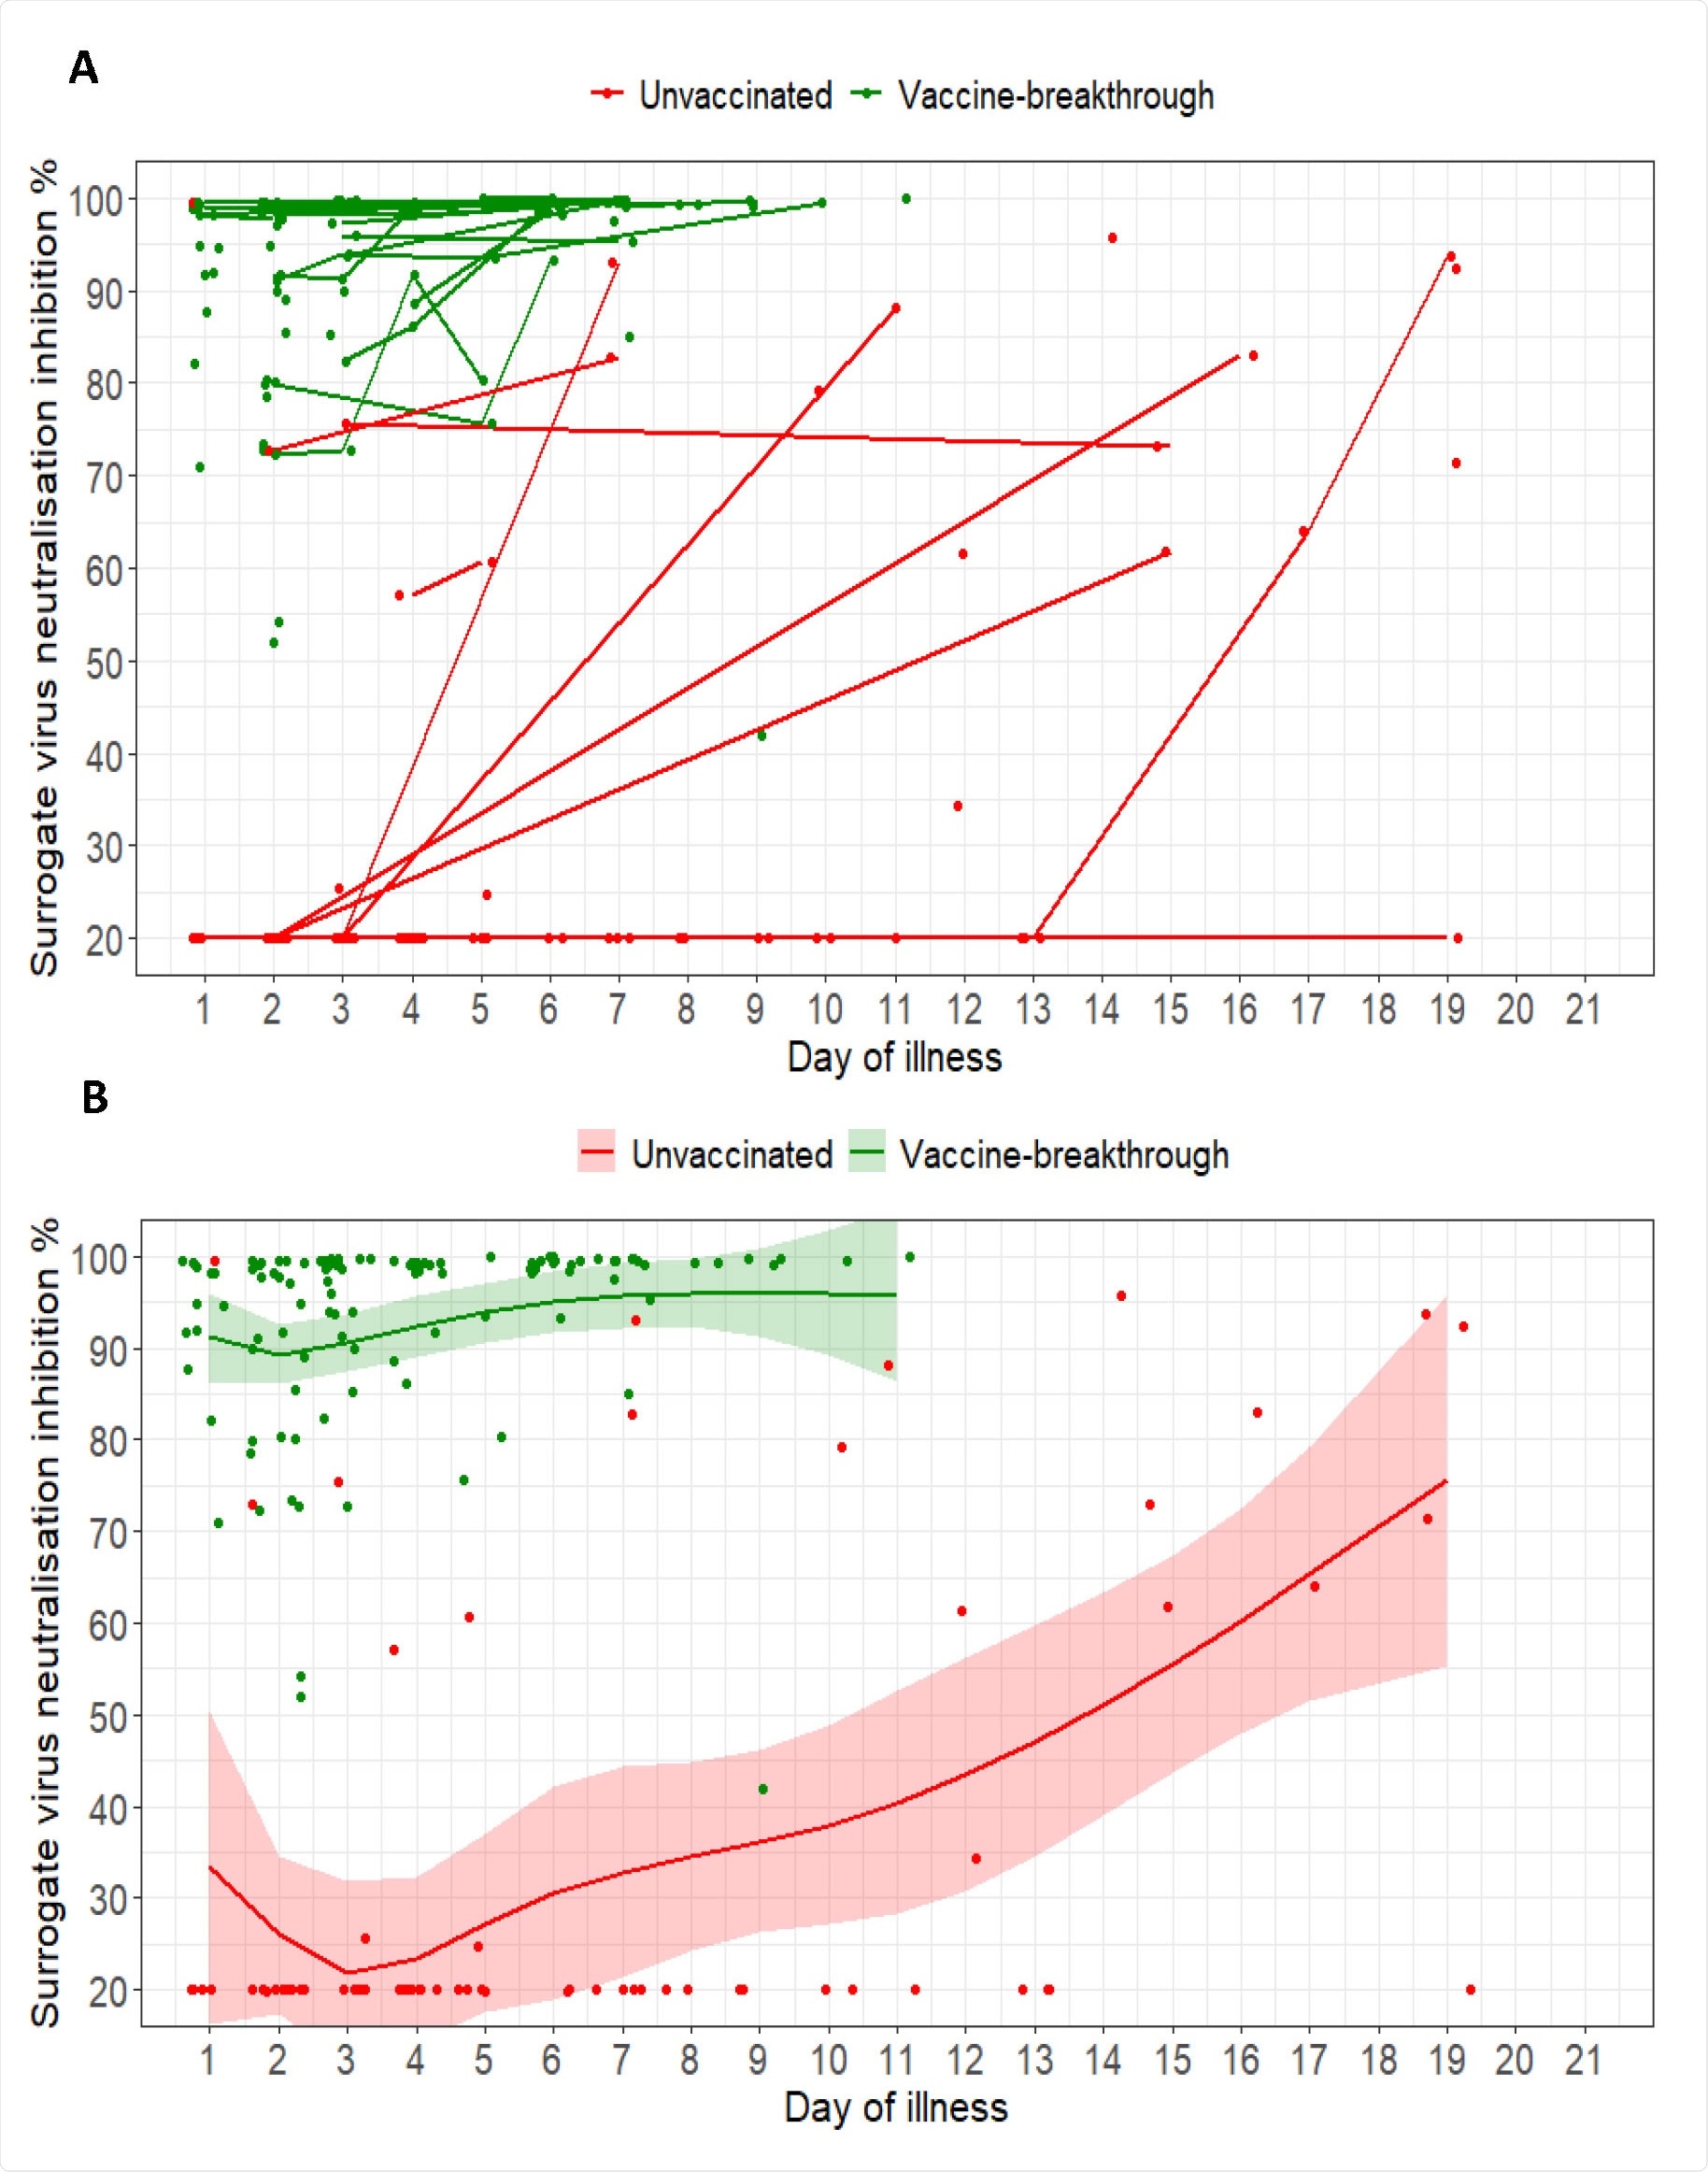 (A) Spaghetti plot of surrogate virus neutralisation (sVNT) inhibition % as measured by cPass; (B) Scatterplot of sVNT inhibition % and marginal effect of day of illness by vaccine breakthrough and unvaccinated groups of COVID-19 B1.617.2 infected patients with 95% confidence intervals from generalized additive mixed models. For both plots,